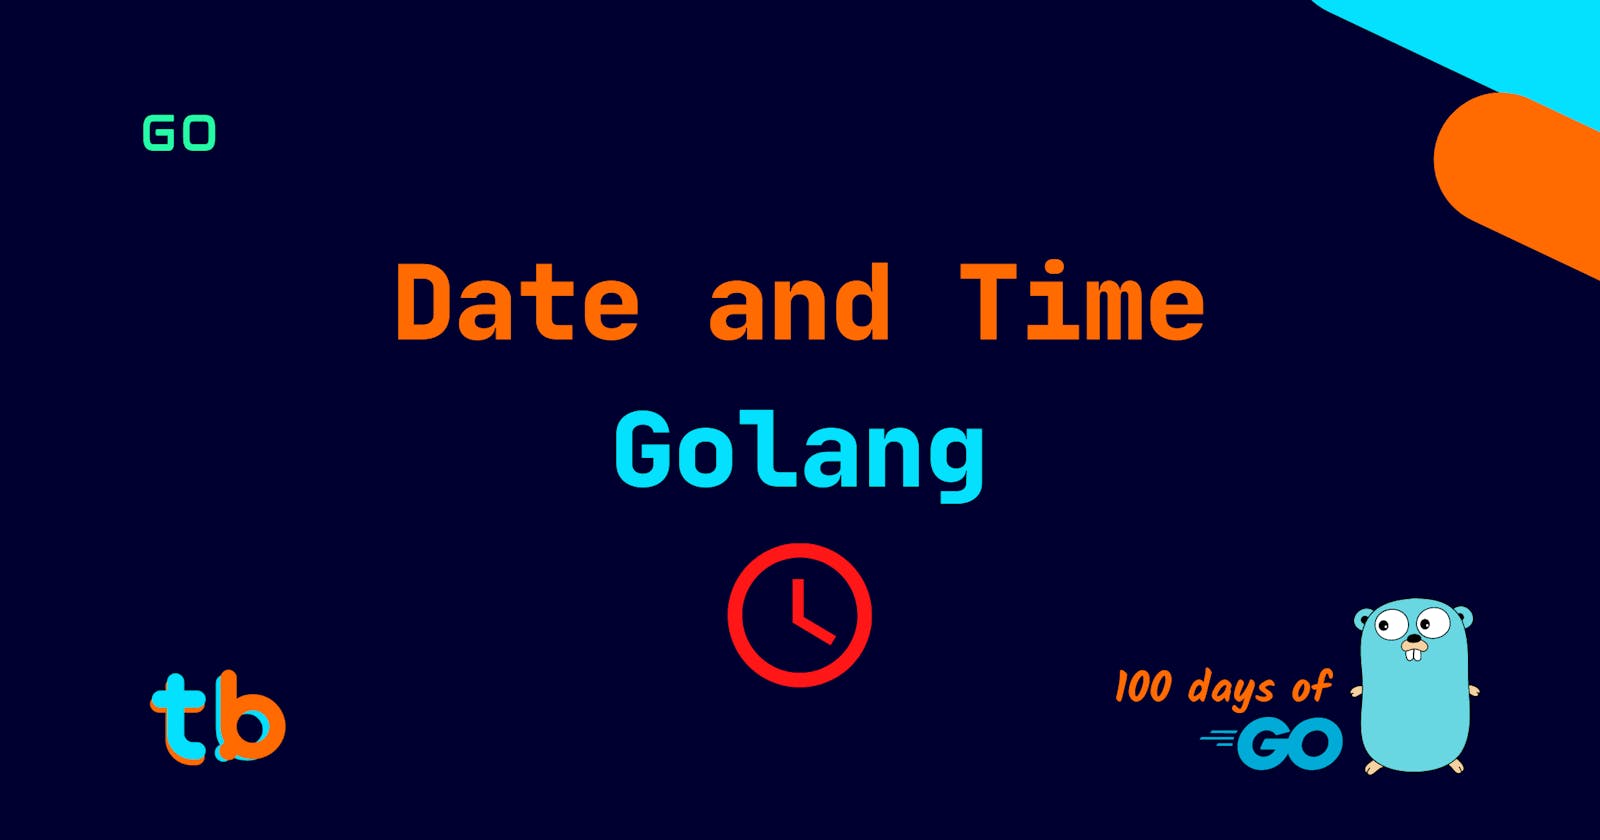 Golang: Date and Time